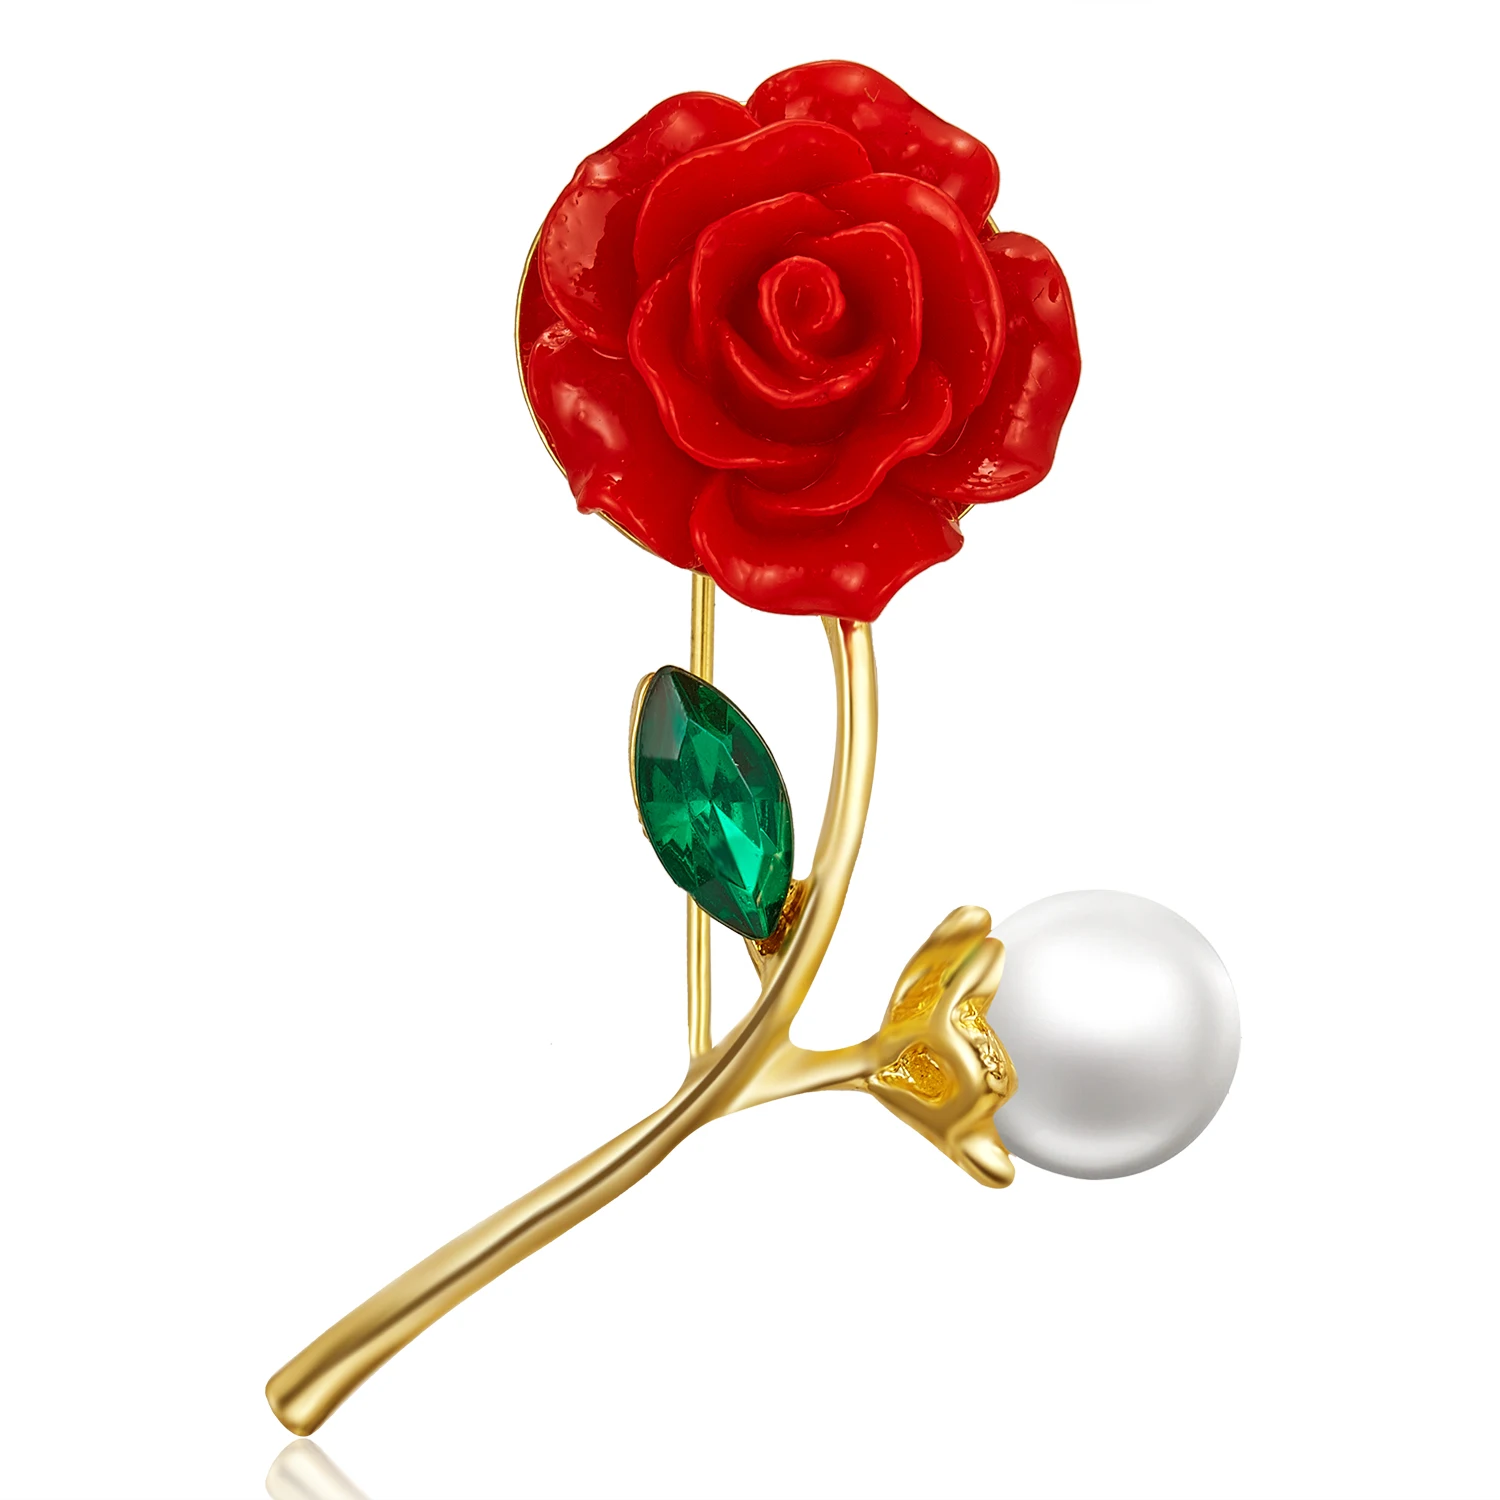 

Vintage Red Rose Flower Brooches Elegant Pearl Tulip Enamel Pins Flowers Wedding Banquet Brooch For Women Lady Fashion Jewelry